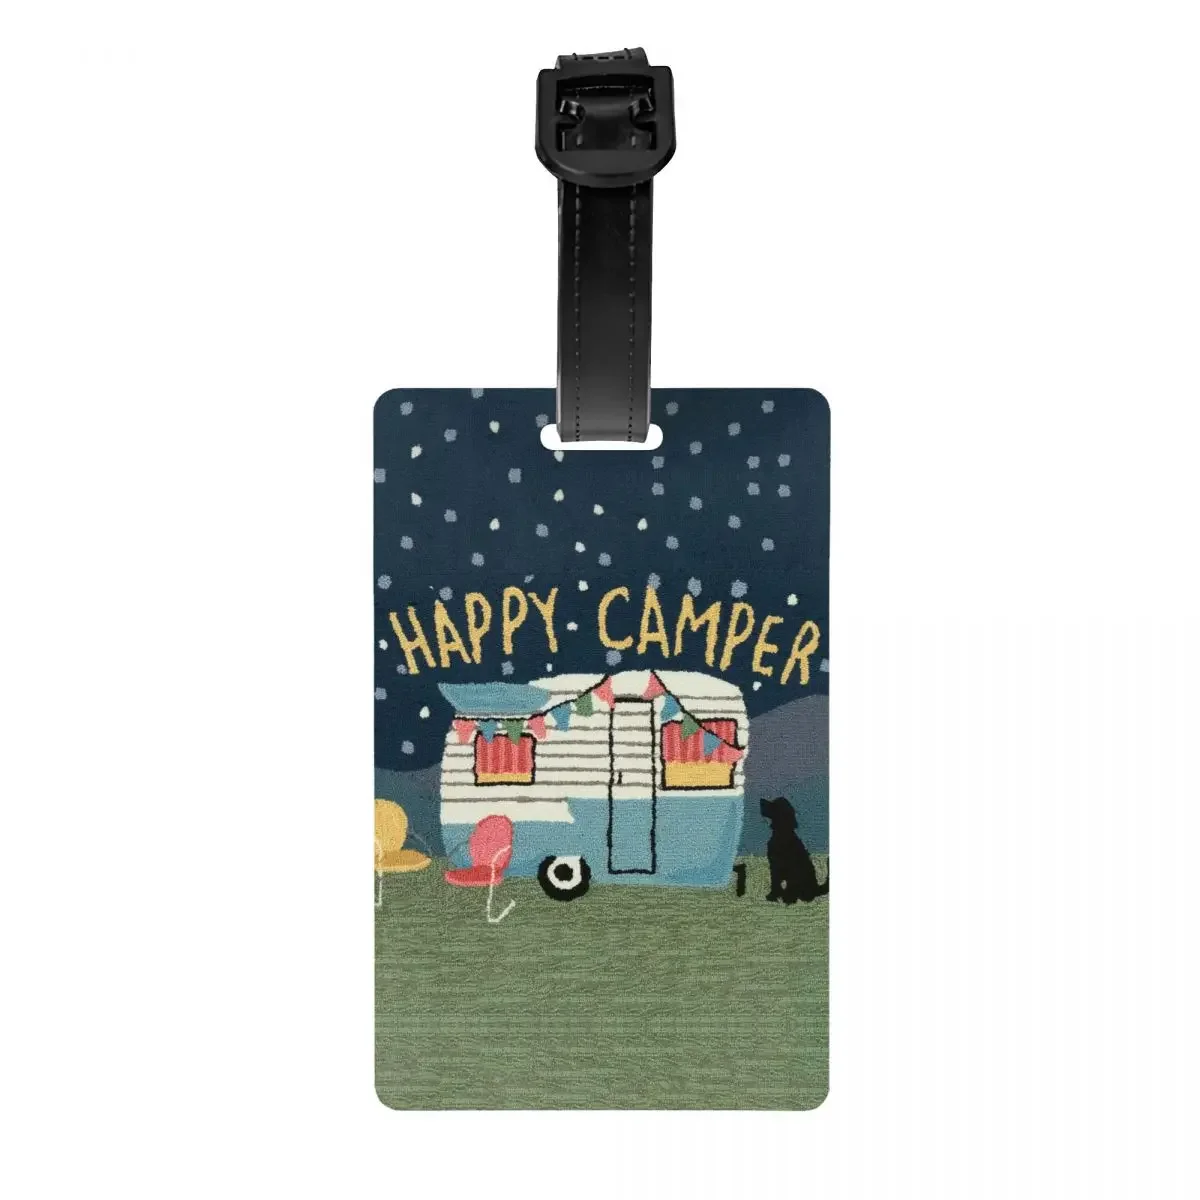 

Adventure Travel Happy Camper Luggage Tag Cartoon RV Camping Suitcase Baggage Privacy Cover ID Label